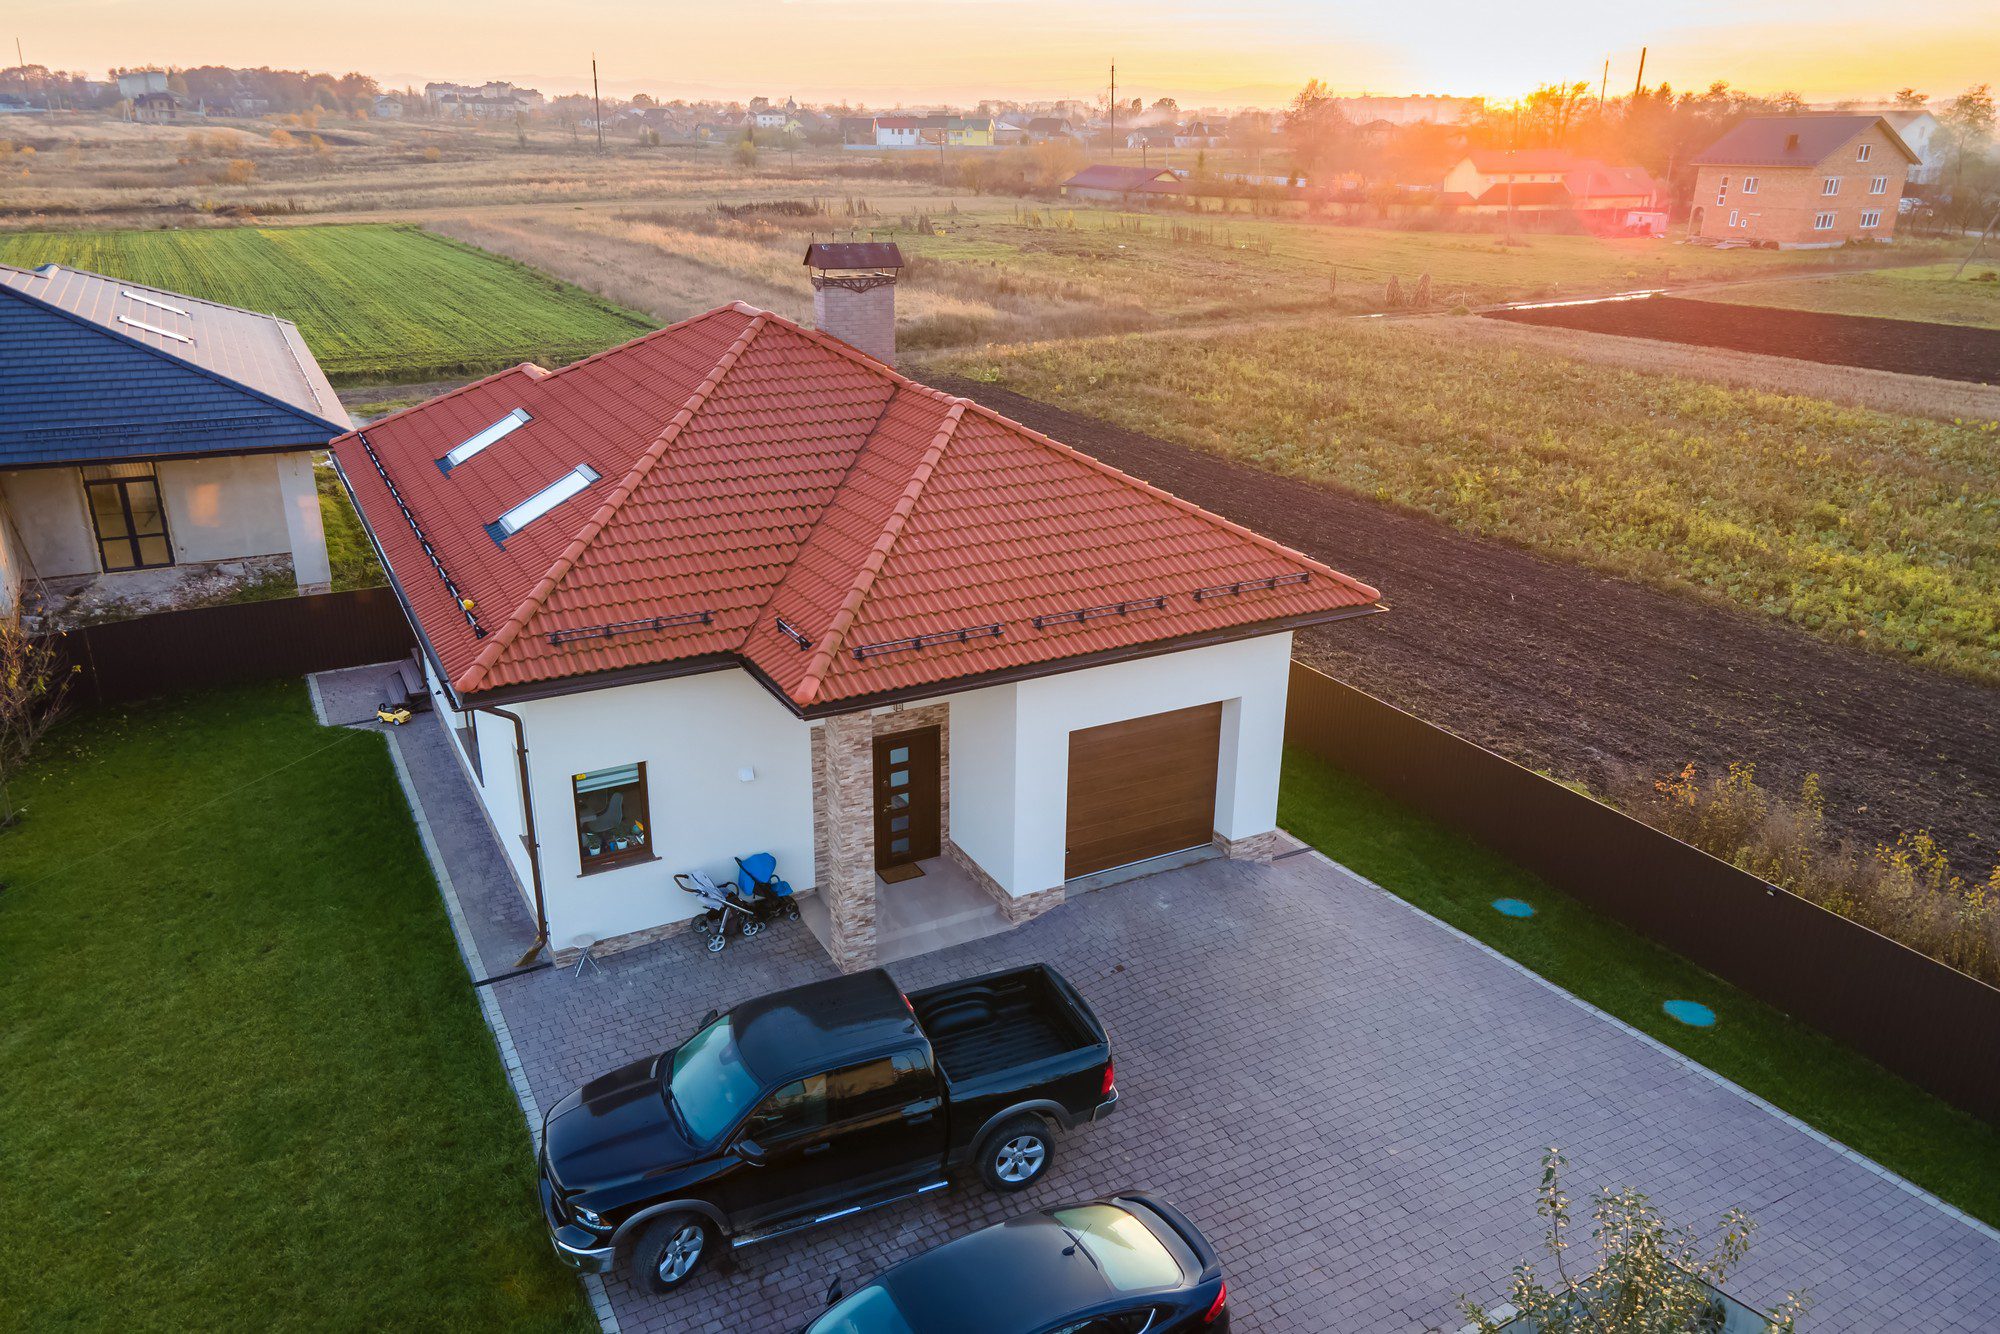 This image shows an aerial view of a residential property during what seems to be sunrise or sunset, as indicated by the warm hues in the sky. The house has a red tiled roof and is surrounded by a manicured green lawn. There's a paved driveway with two vehicles parked outside—one SUV and a sedan. Adjacent to the house, there's a structure with a dark roof, possibly an older building or a barn. The surrounding landscape includes open fields, and in the background, there are more residential buildings. A fence borders the property on at least two sides. The entire scene suggests a suburban or rural setting.